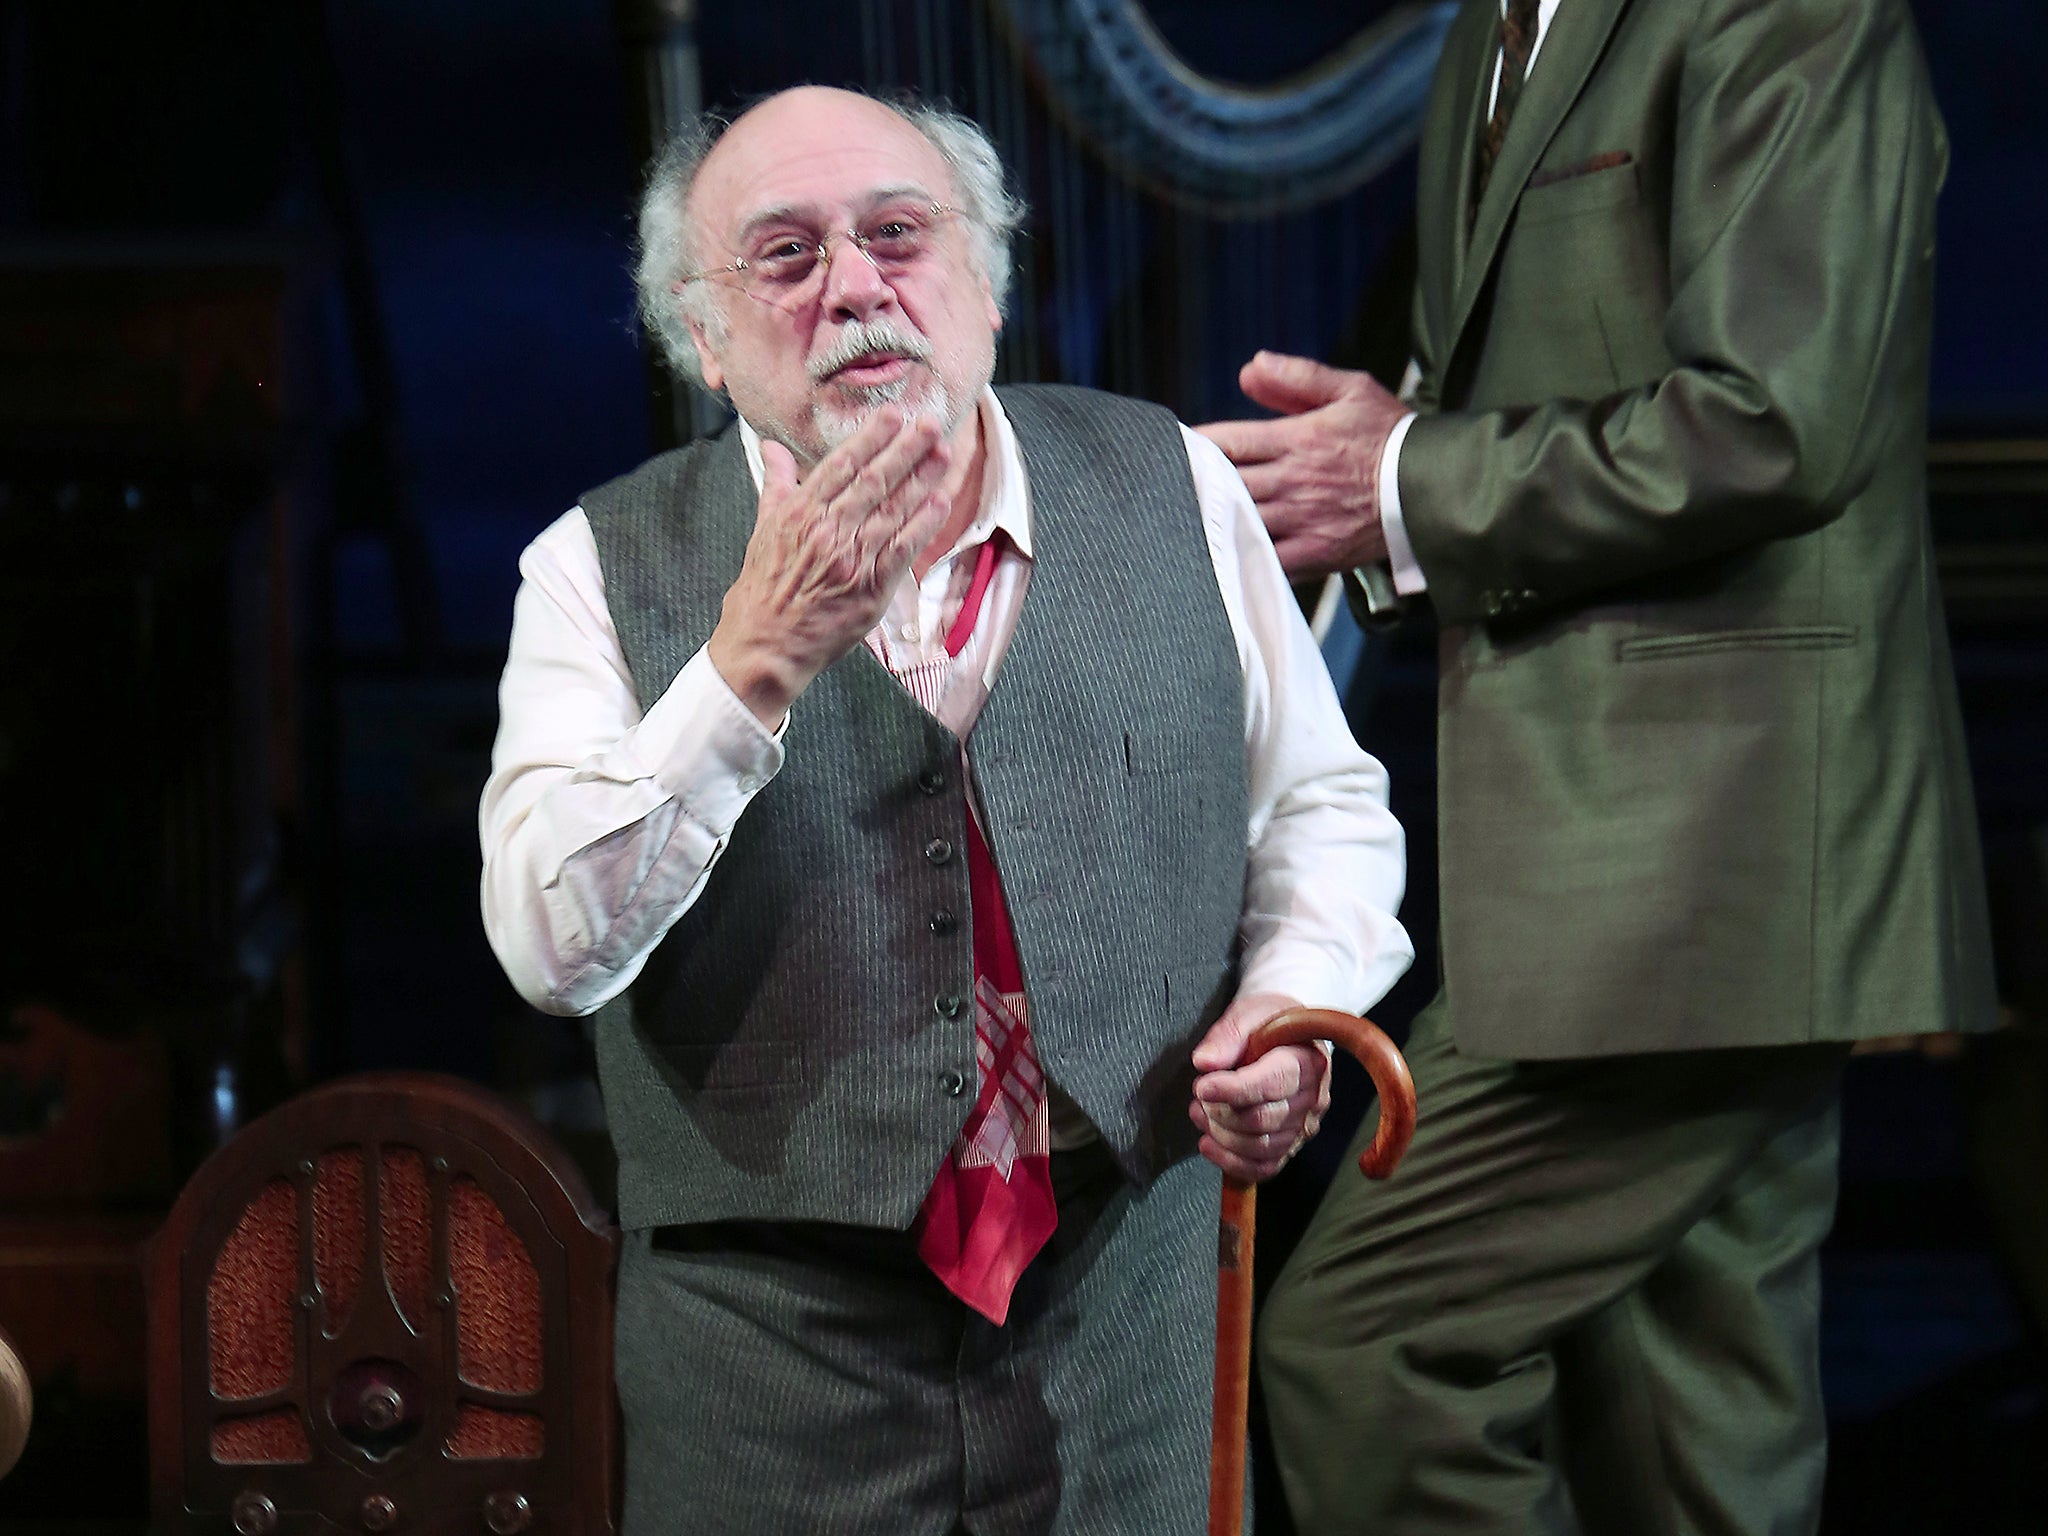 DeVito at the curtain call of the current Broadway show ‘The Price’ (WireImage)